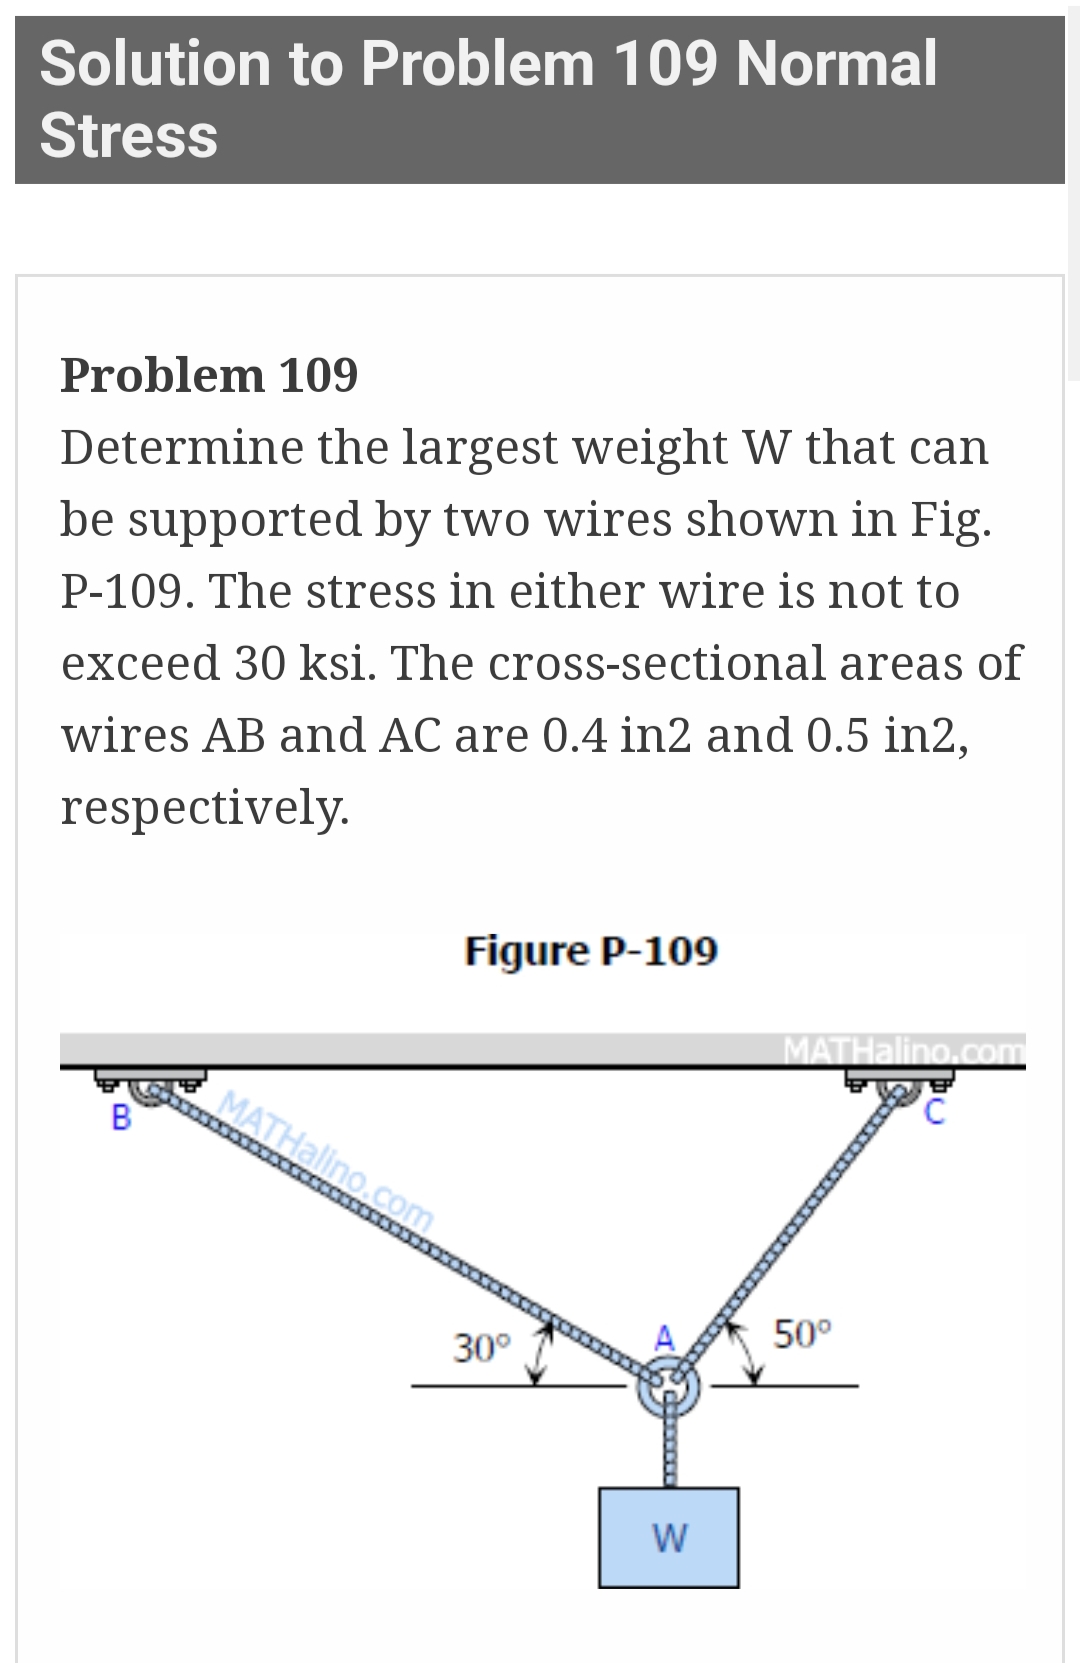 Solution to Problem 109 Normal
Stress
Problem 109
Determine the largest weight W that can
be supported by two wires shown in Fig.
P-109. The stress in either wire is not to
exceed 30 ksi. The cross-sectional areas of
wires AB and AC are 0.4 in2 and 0.5 in2,
respectively.
B
Figure P-109
MATHalino.com
30°
W
MATHalino.com
C
50⁰